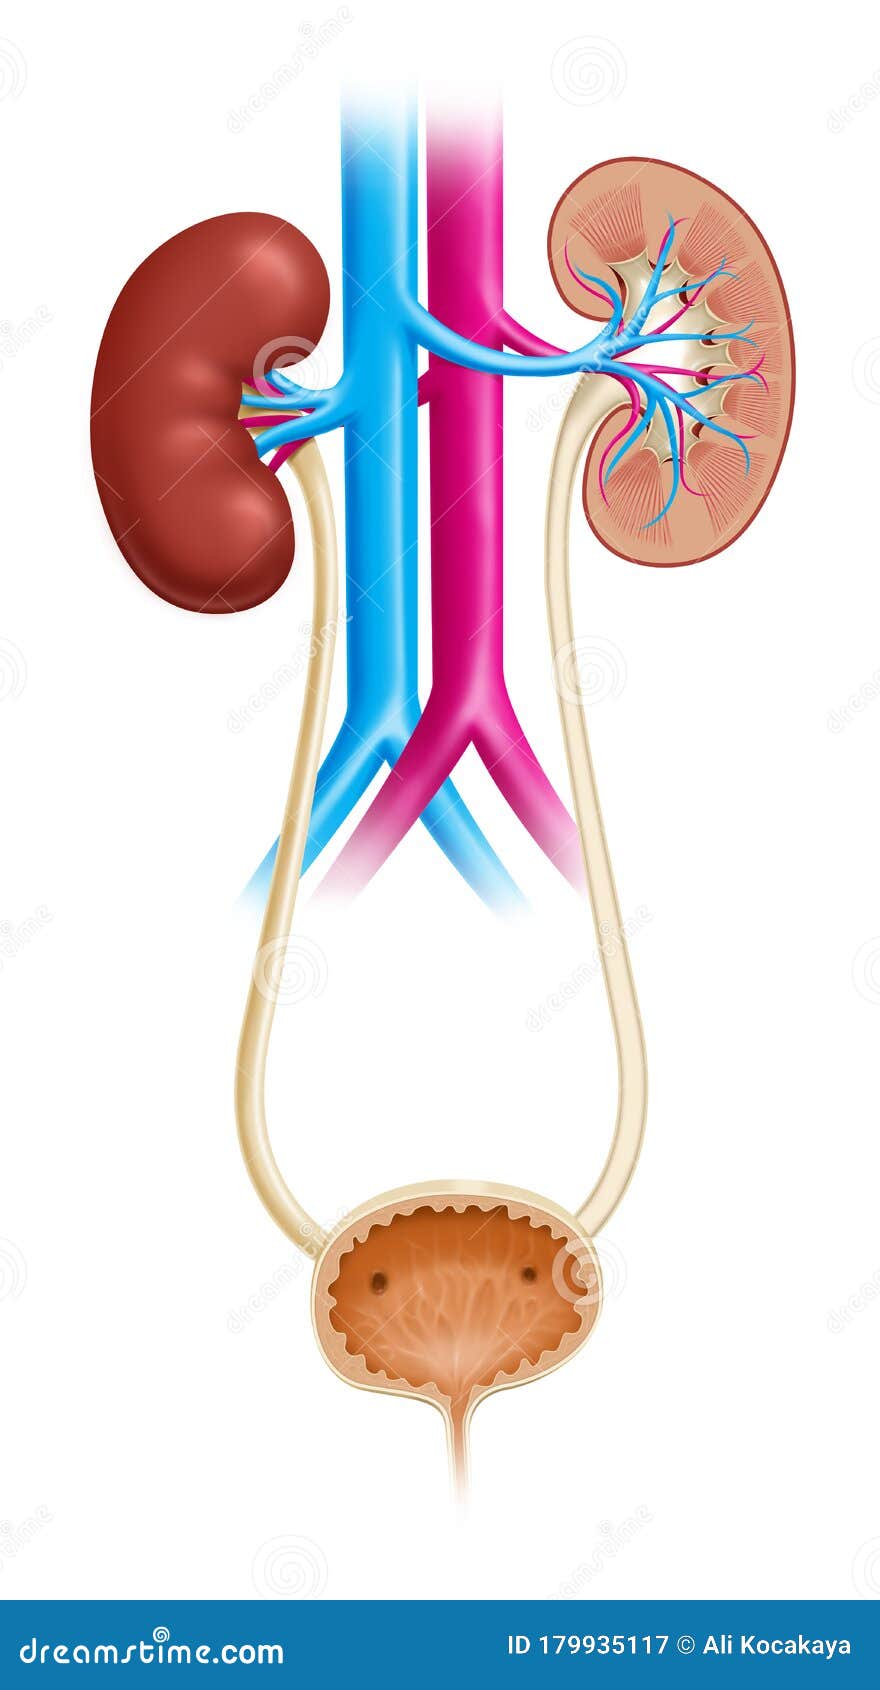 anatomy of the human urinary system